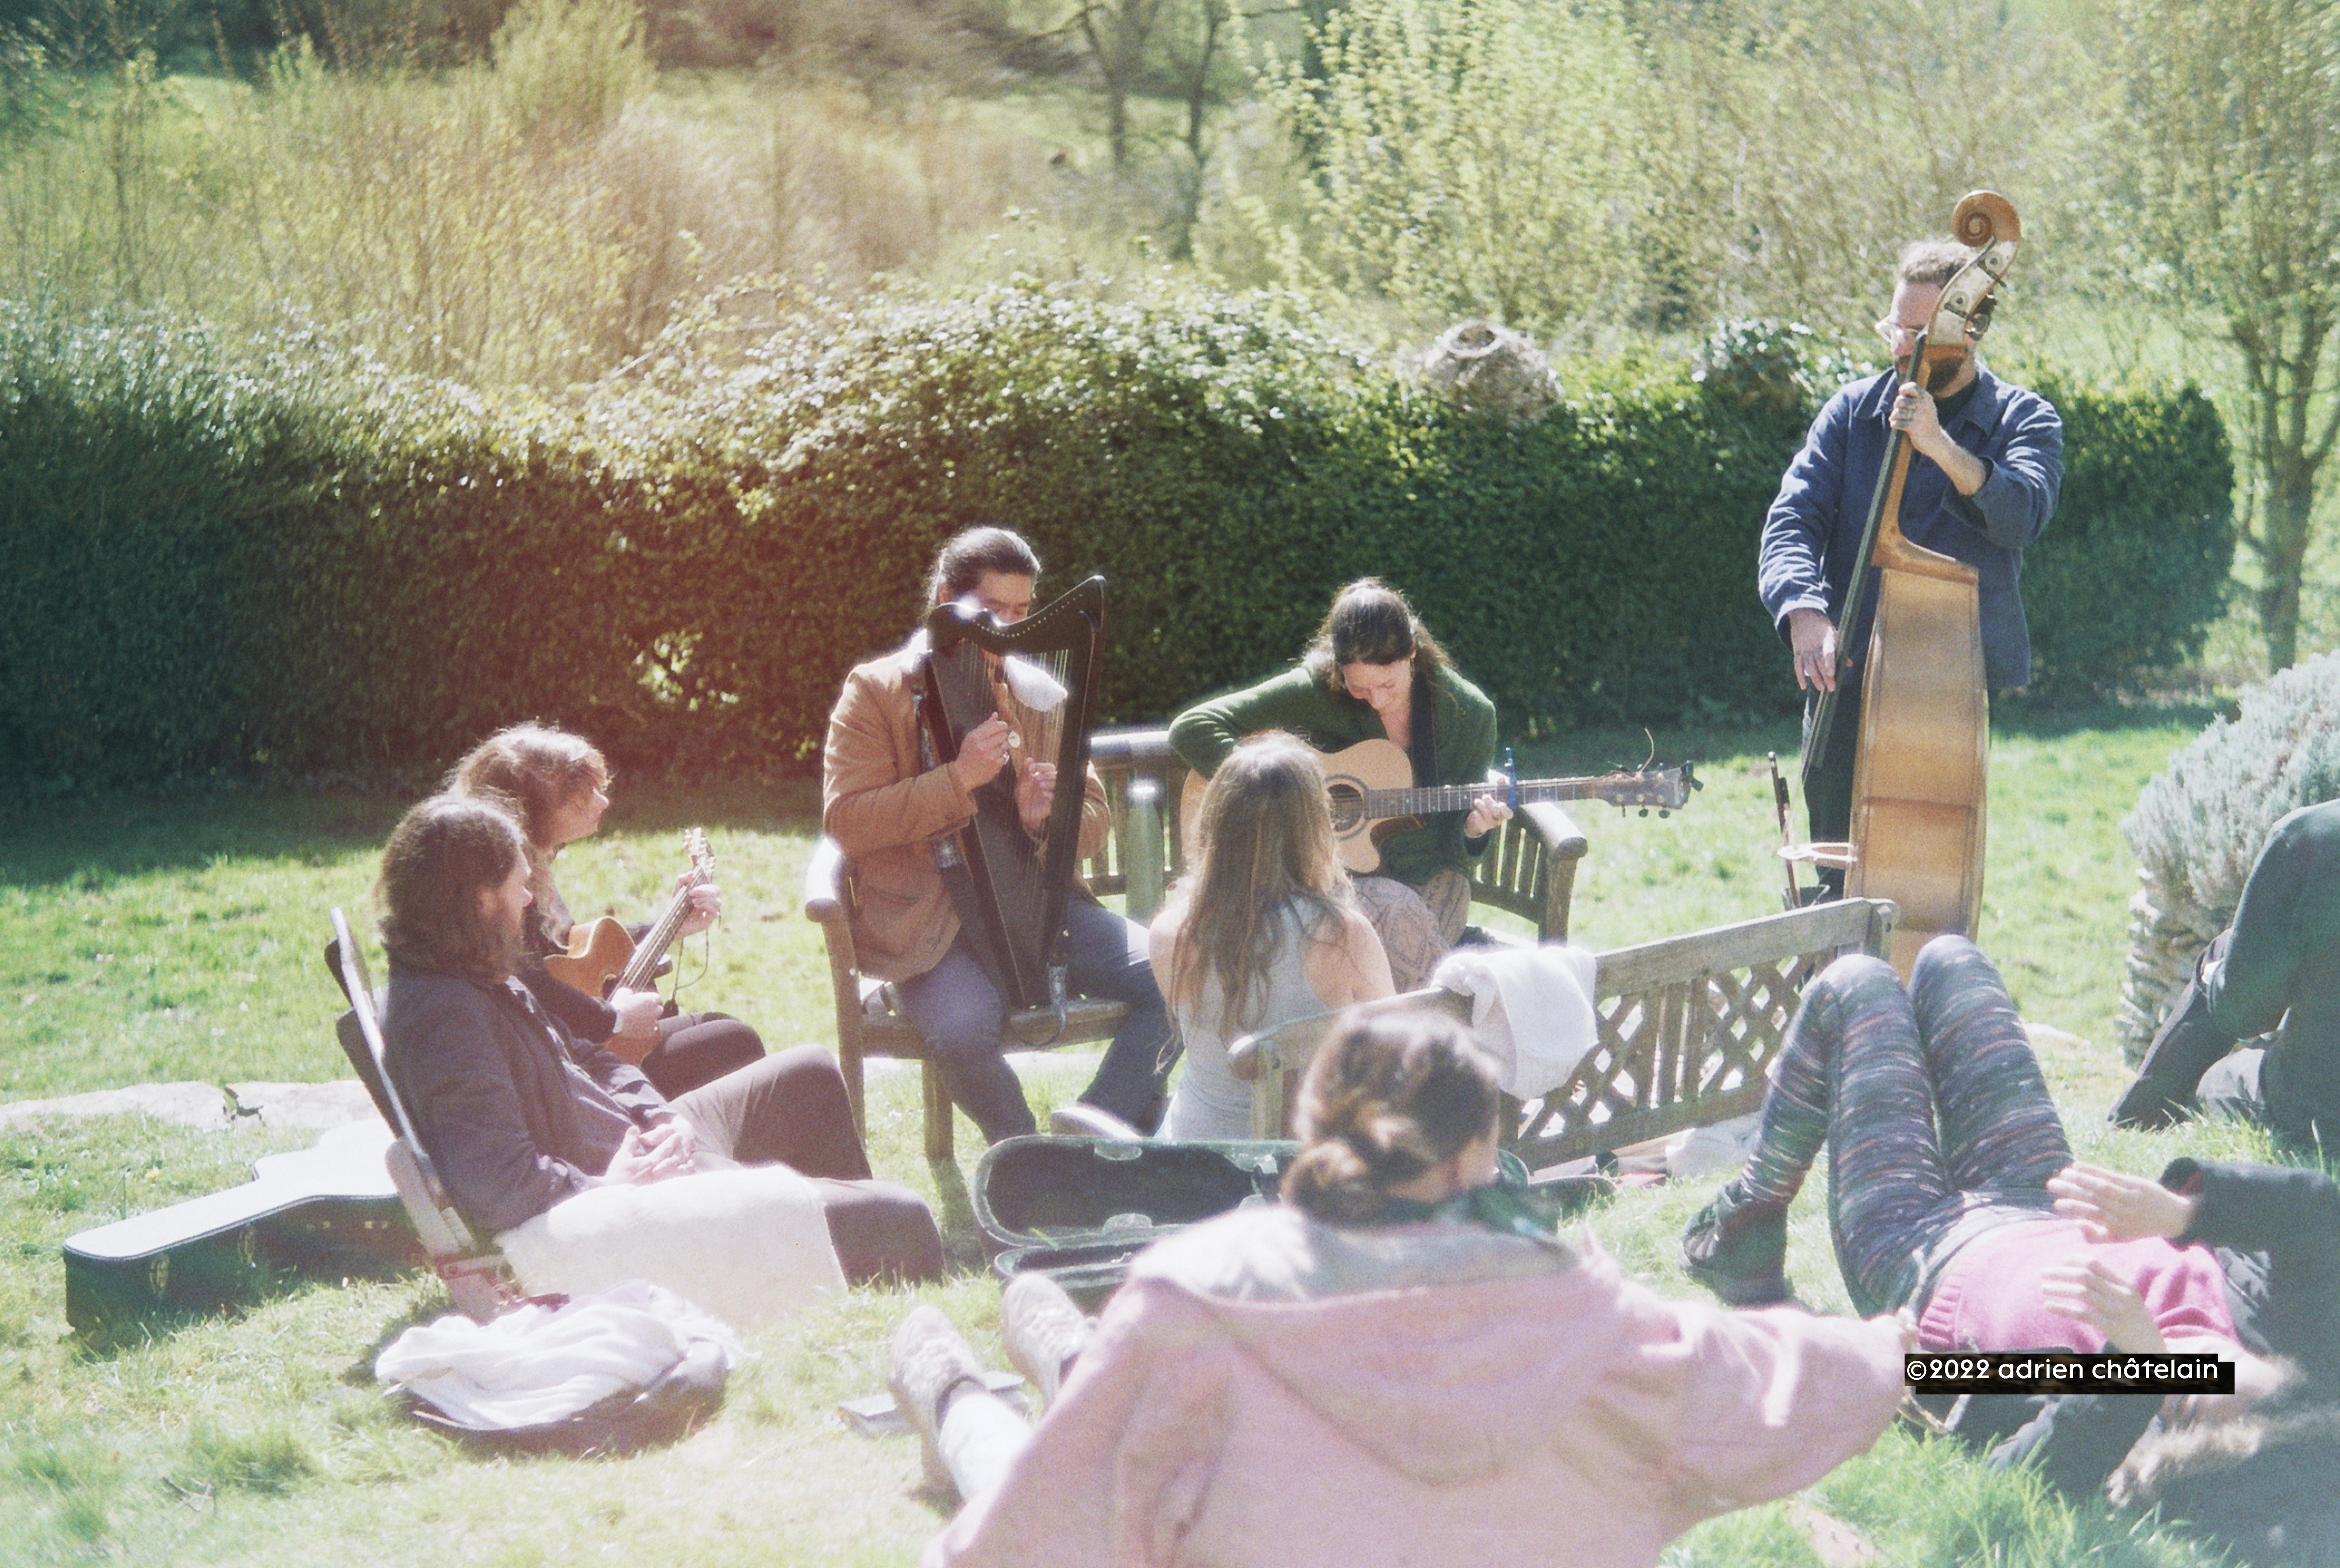 Talented musicians improvise with acoustic instruments in the sunnny gardens of Hawkwood